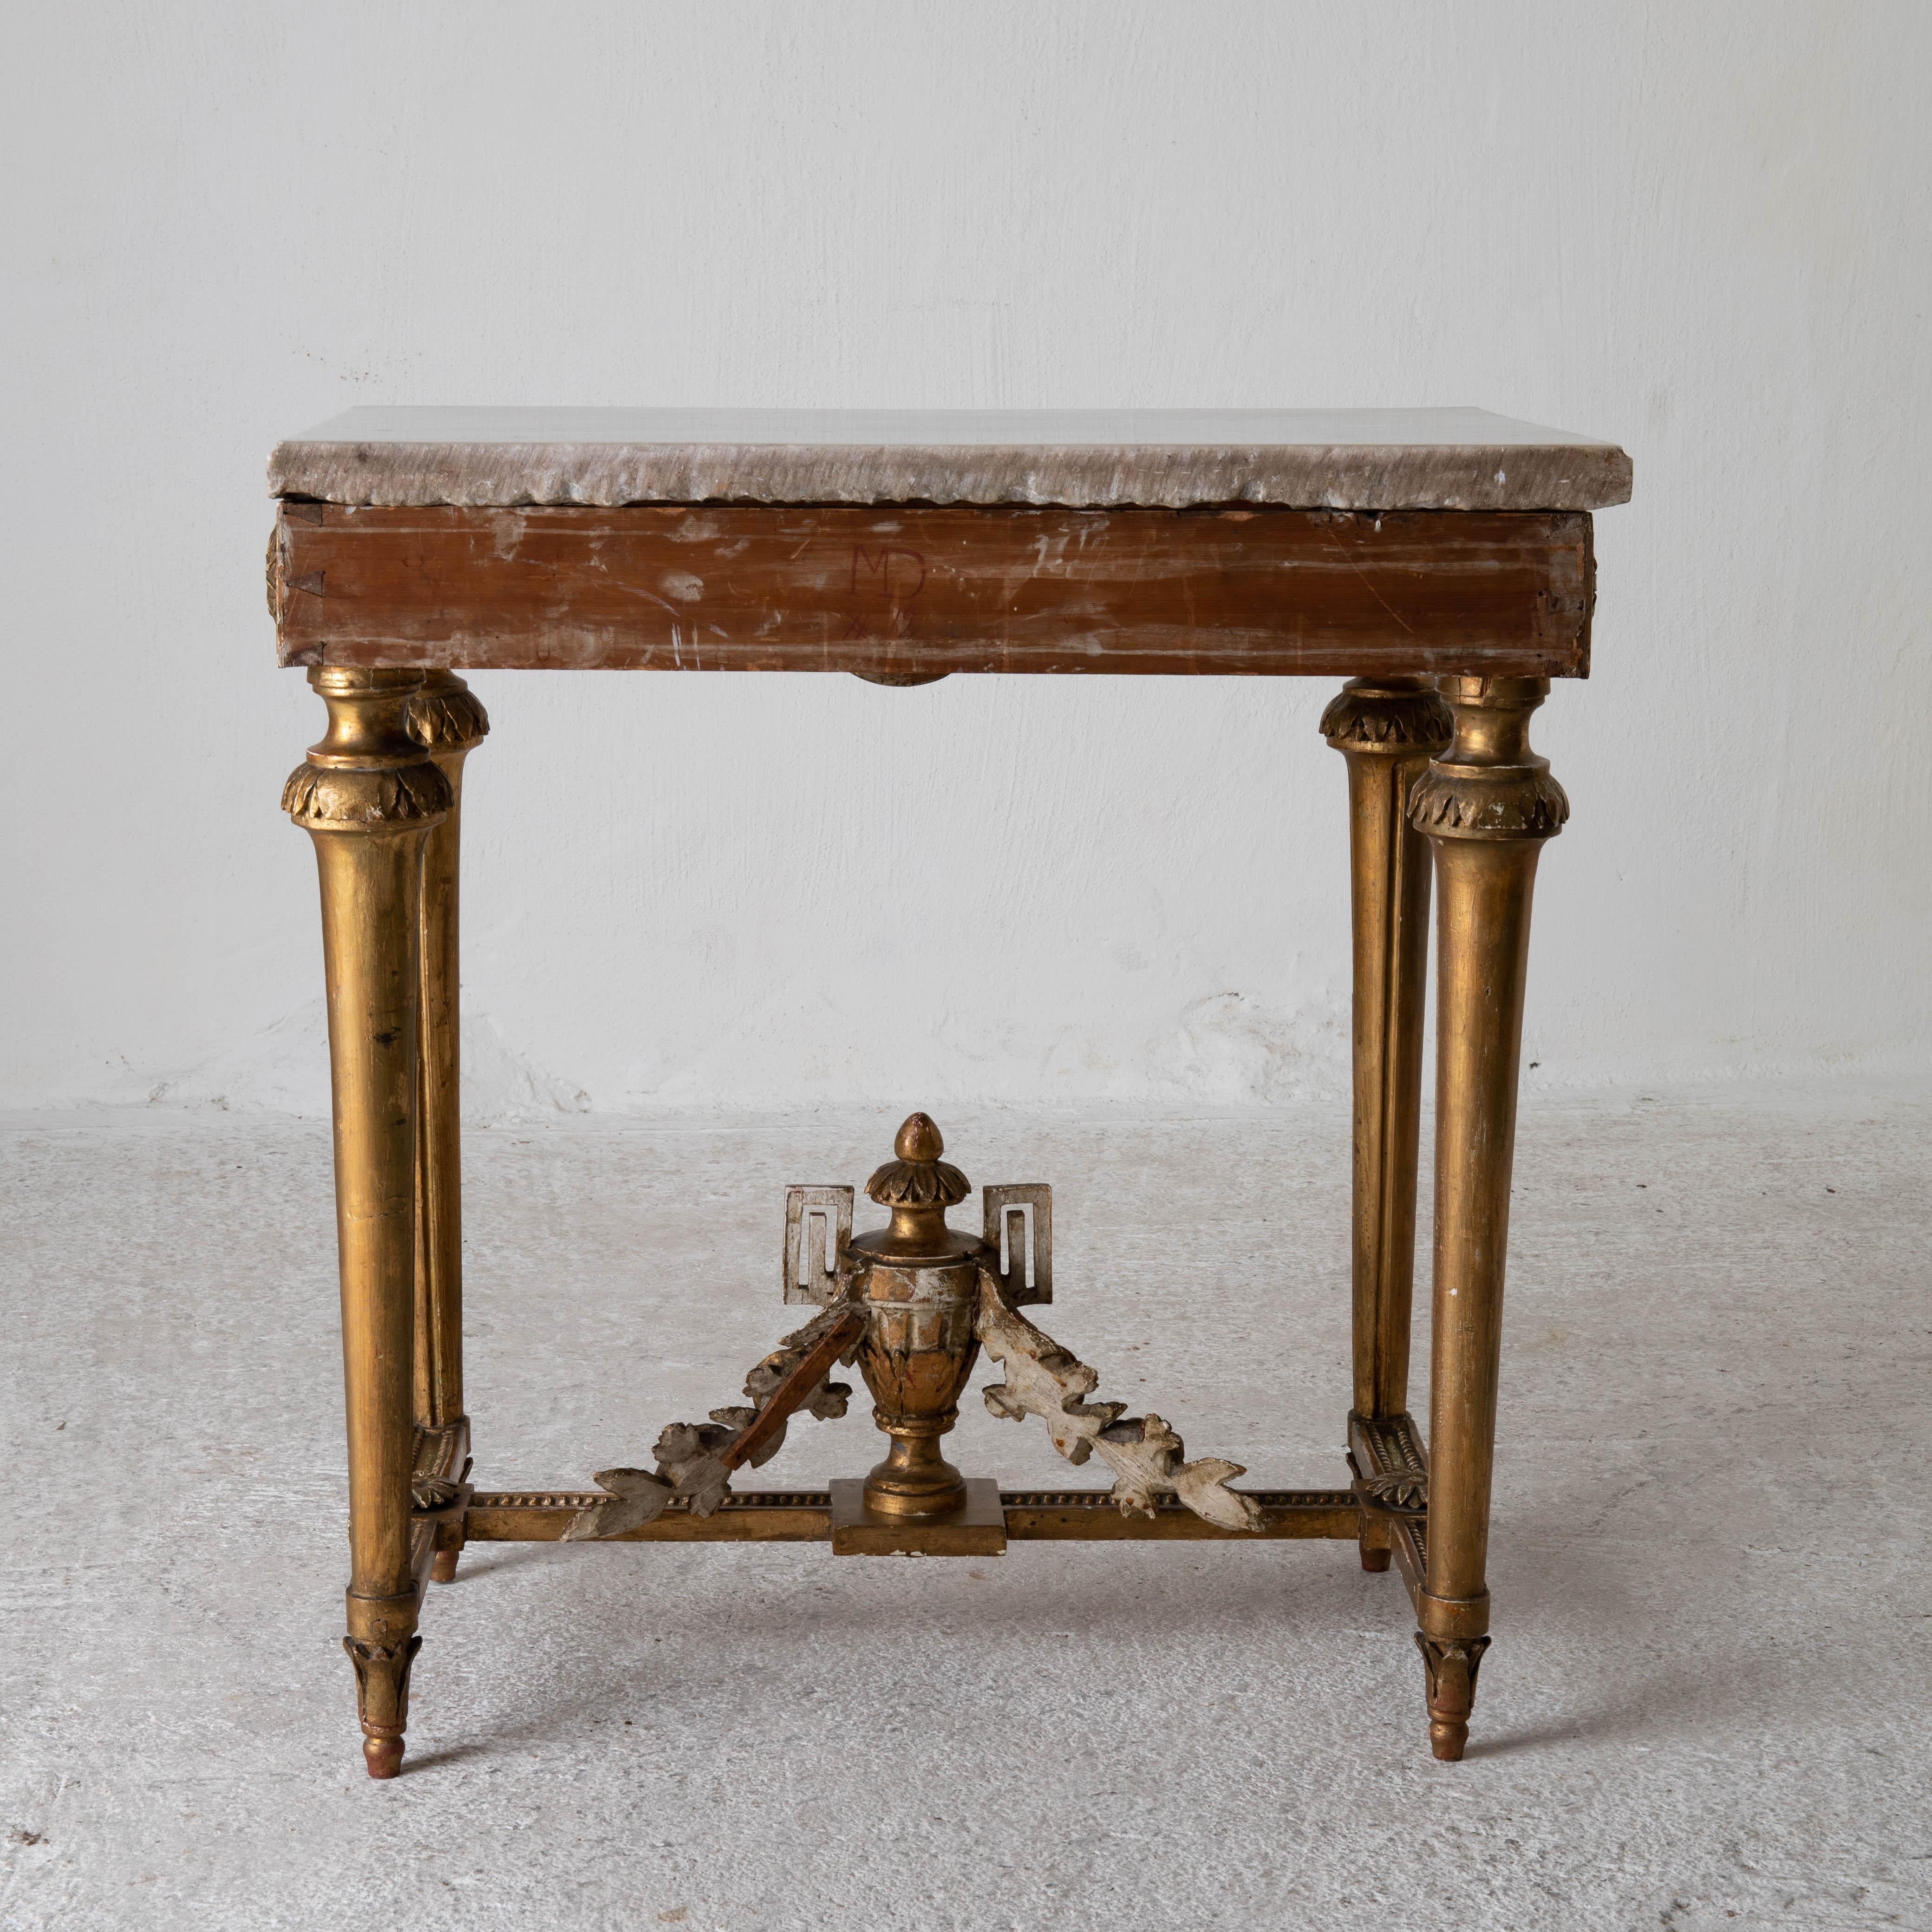 Table console rare quality Swedish early Gustavian gilded 18th century Sweden. A console table made during the Gustavian period in Sweden 1775-1790. Original gilding and white marble top. Decorated with laurel swags and channeled legs. Frieze edged